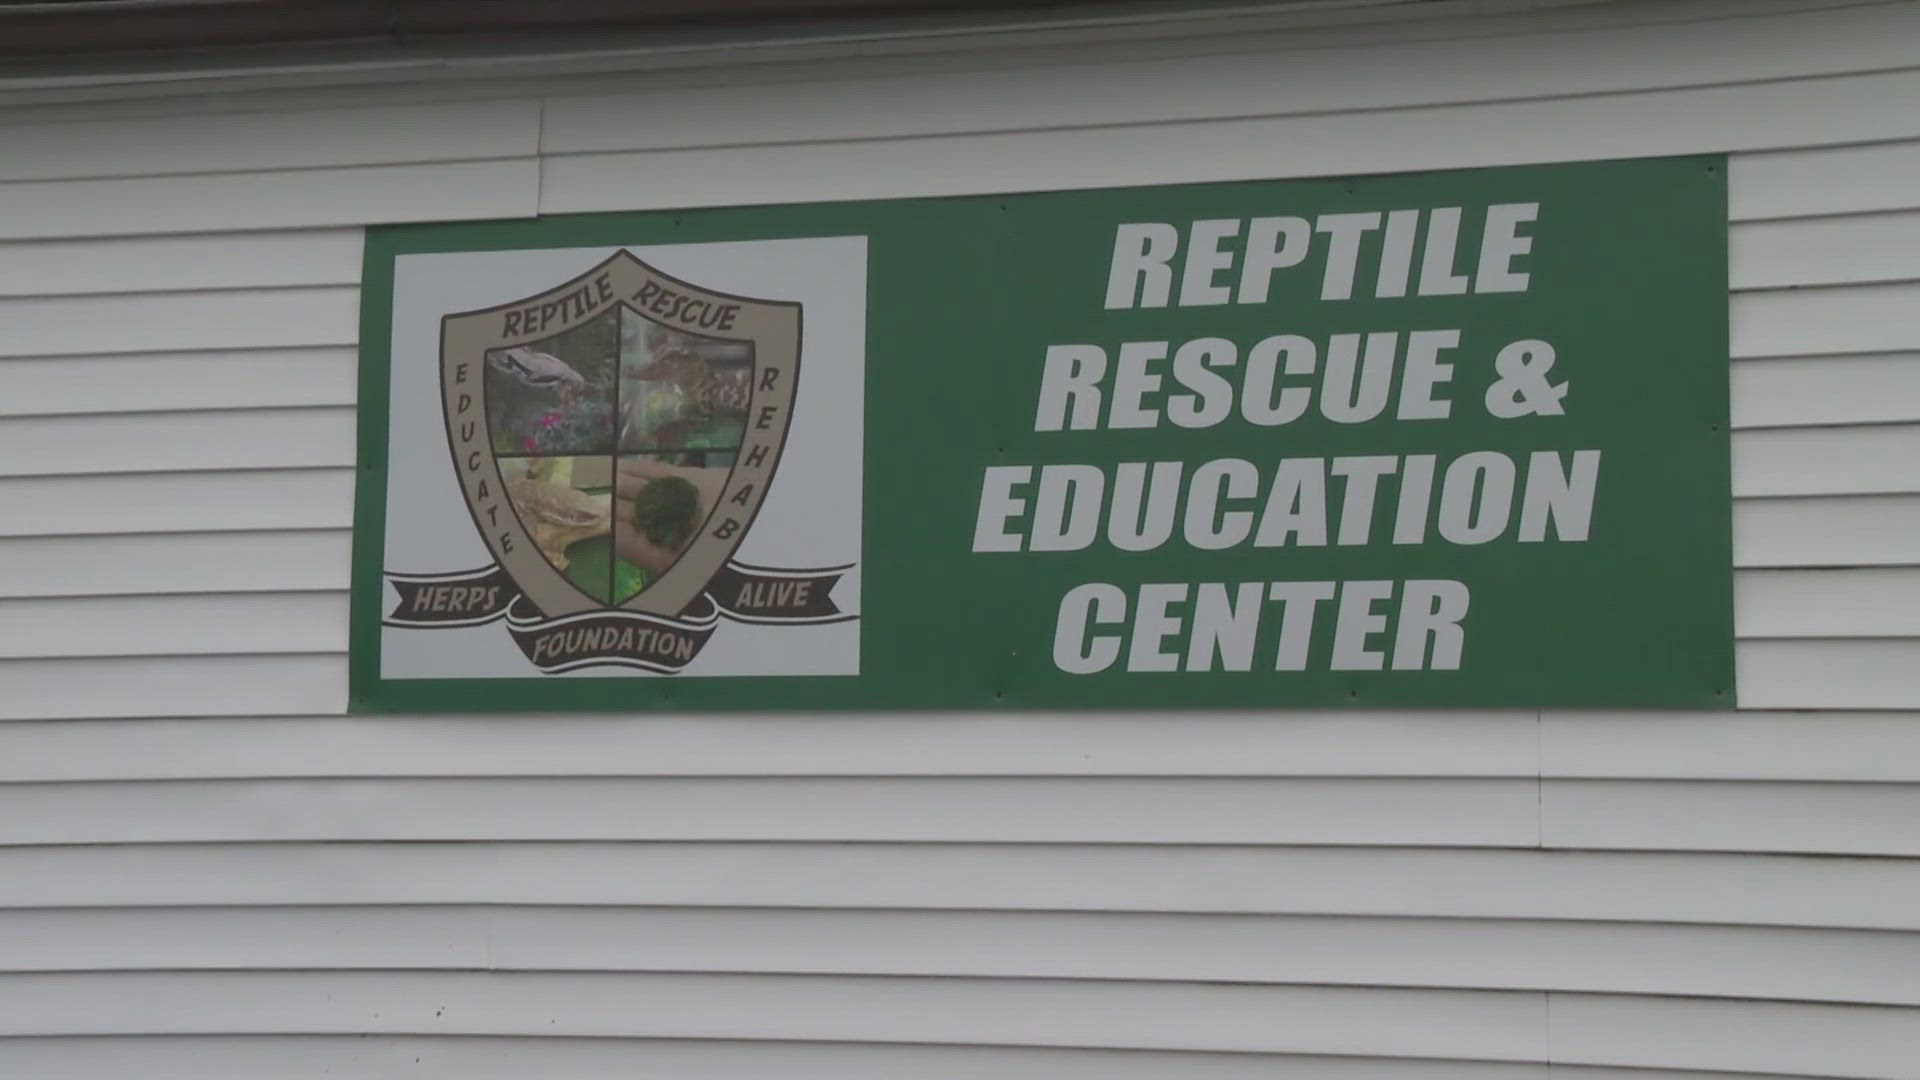 Herps Alive rehabilitates and finds homes for surrendered or abandoned reptiles. A recent surge in lettuce prices is taking a big bite out of their food budget.